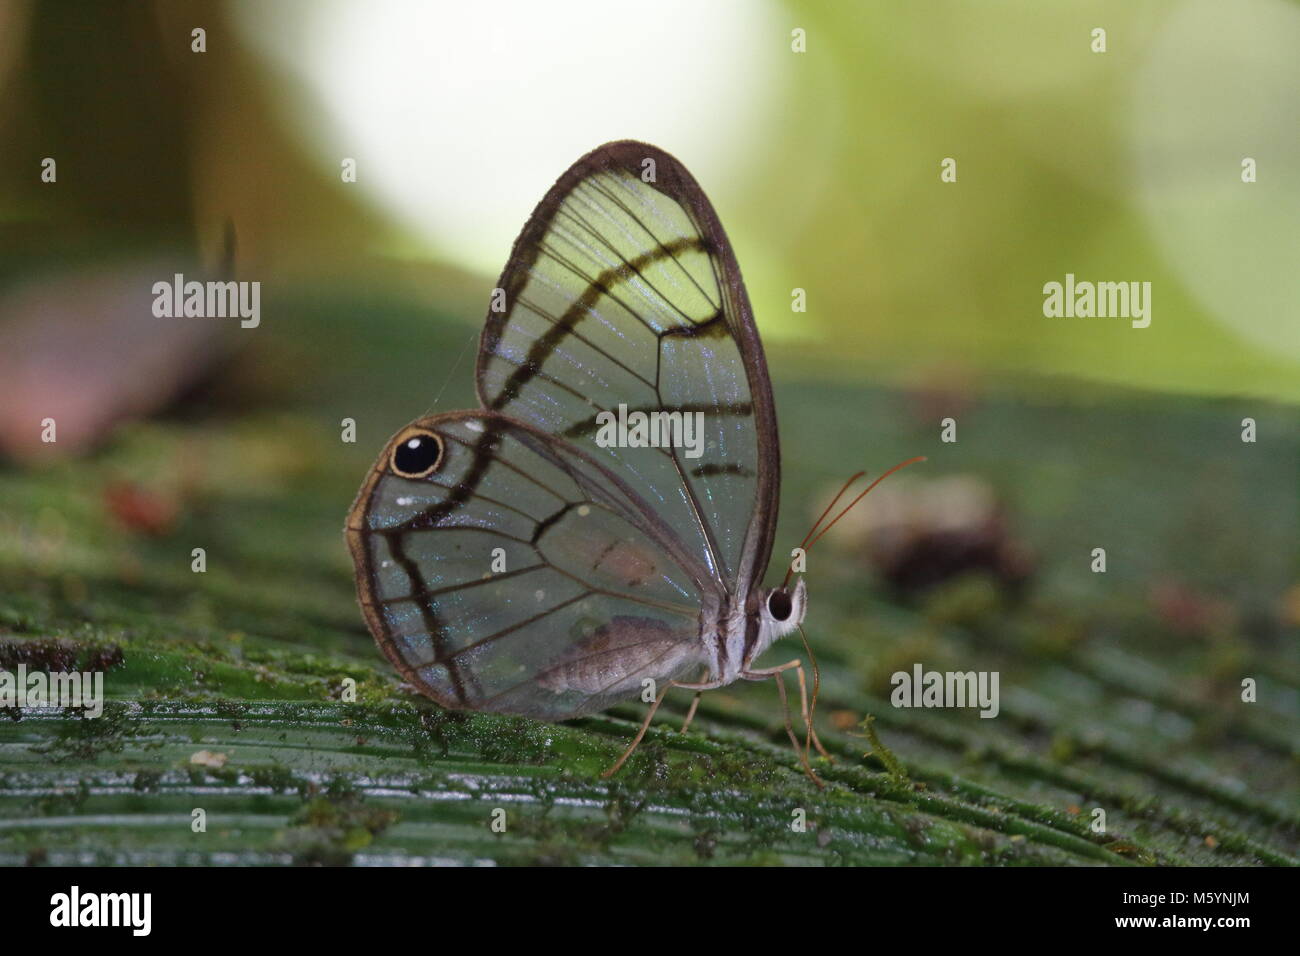 Glasswing butterfly Dulcedo polita Costa Rica Banque D'Images